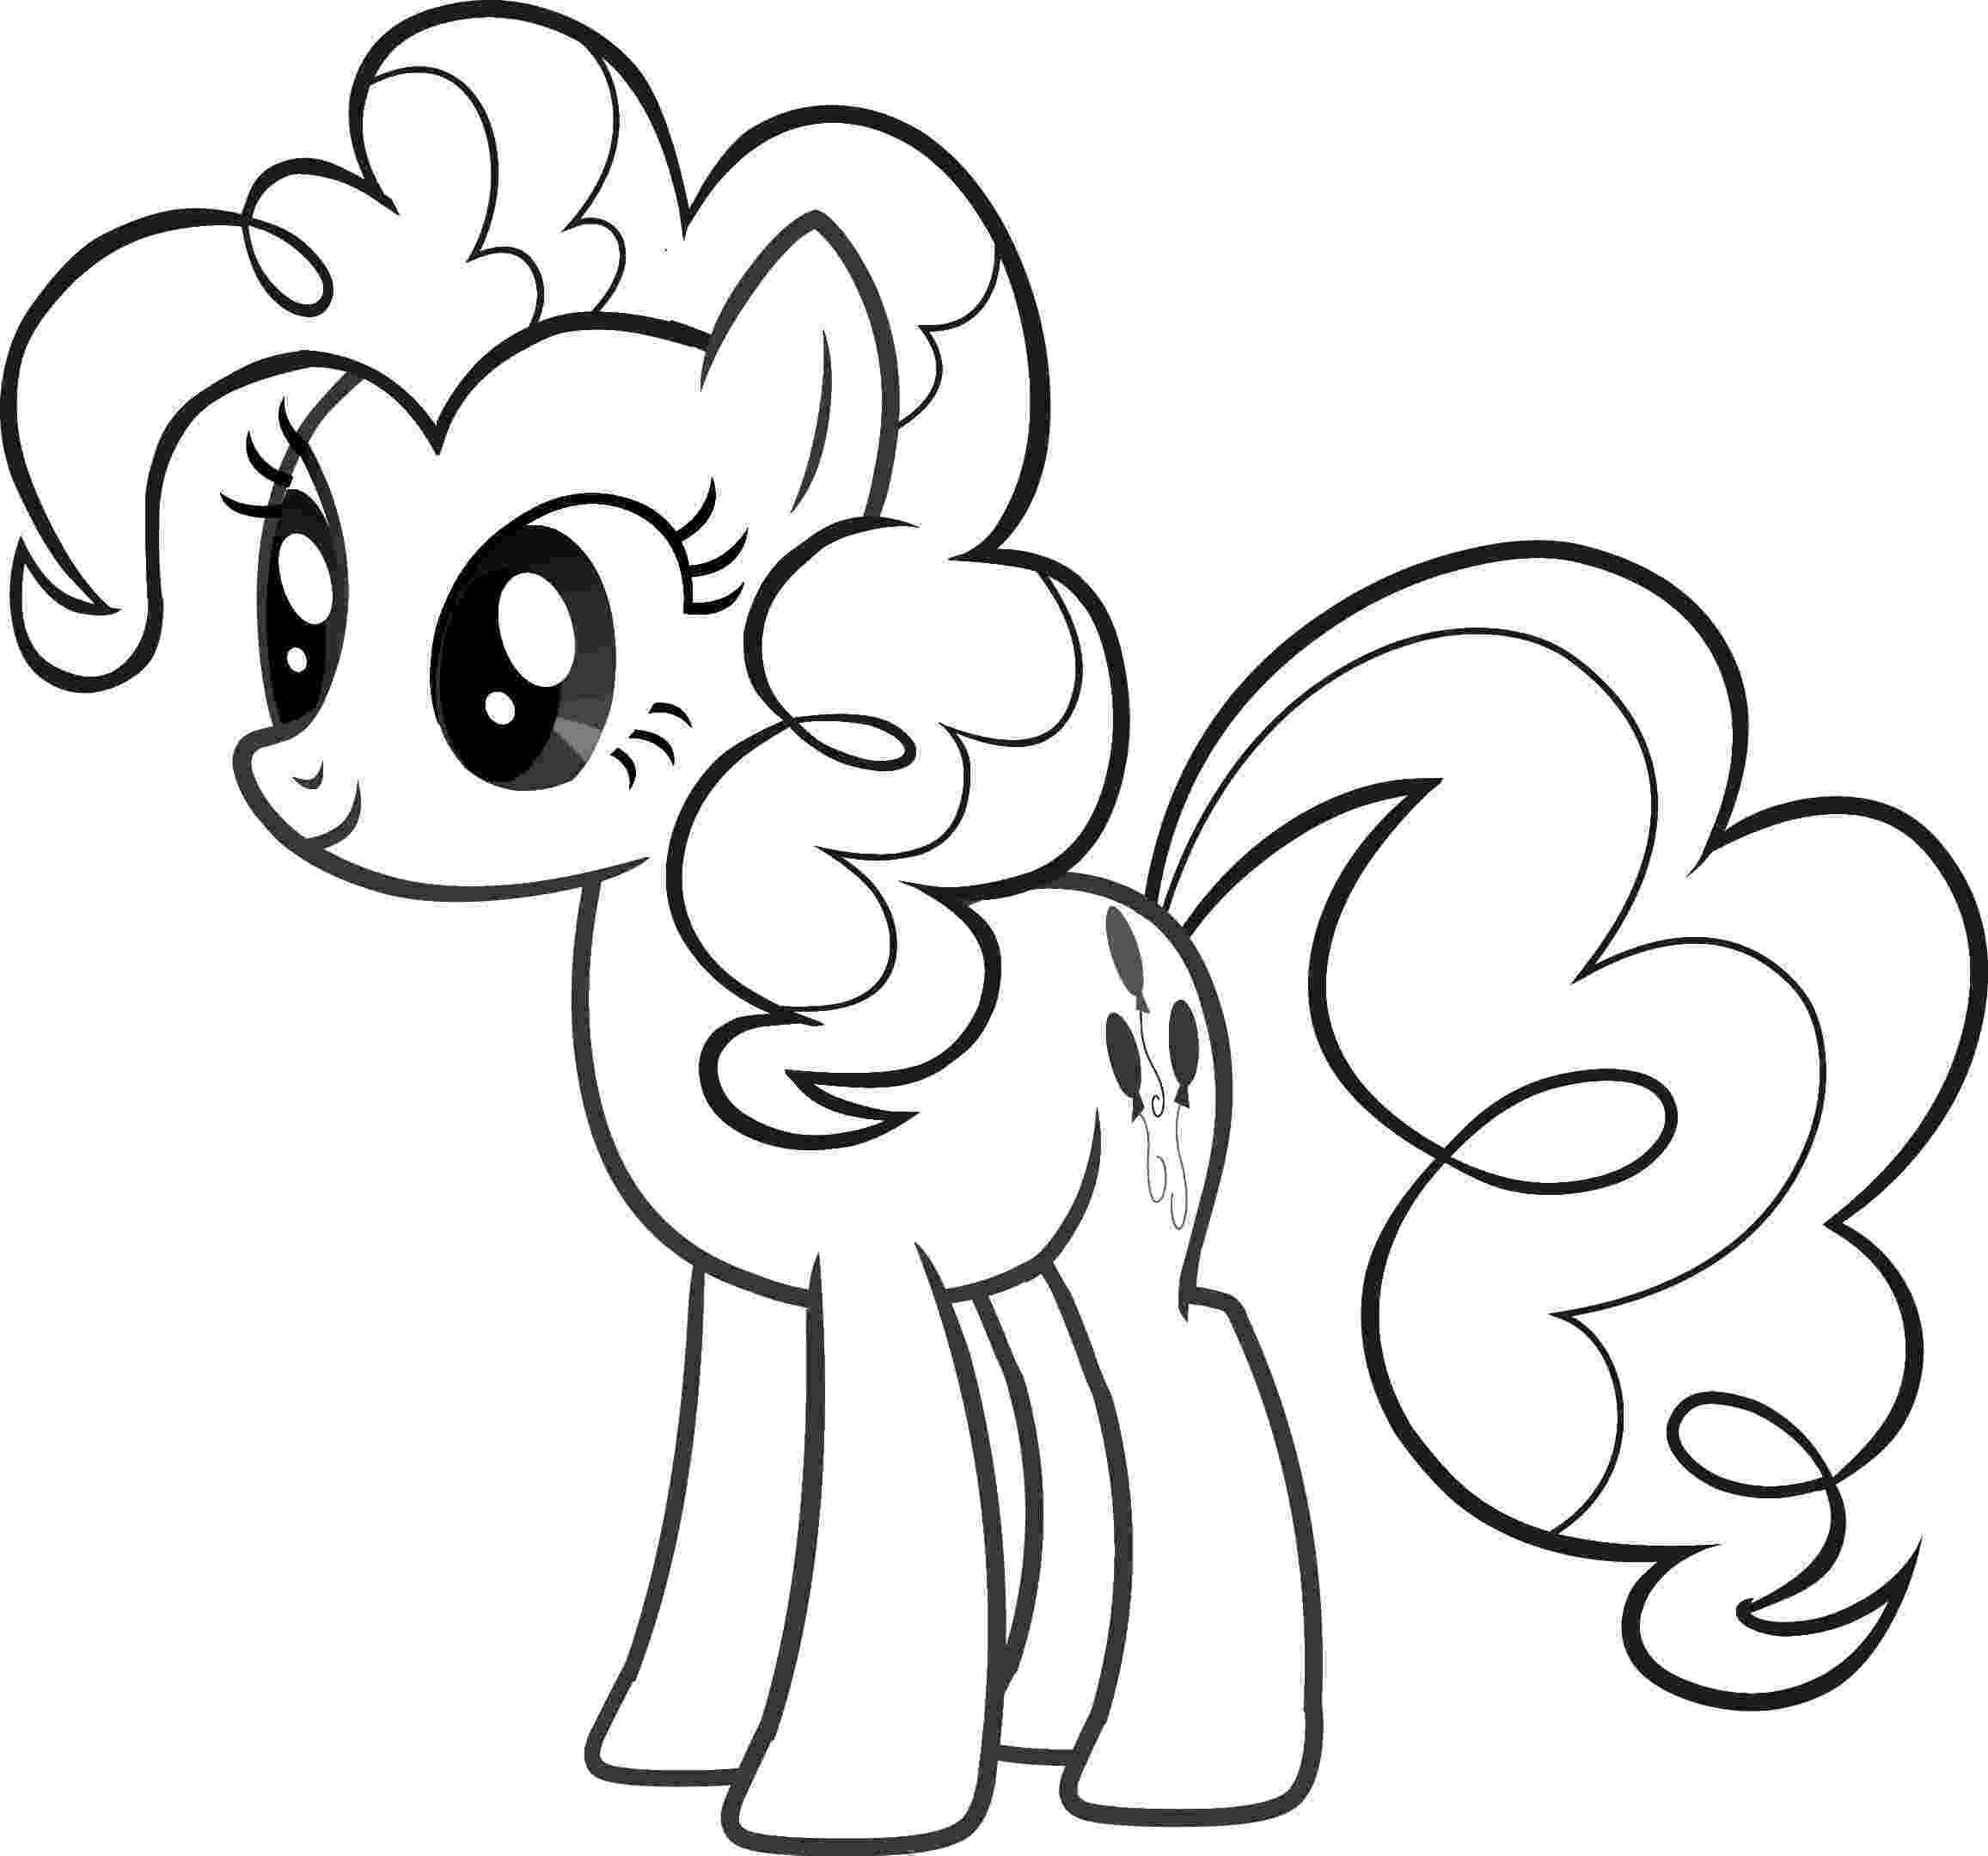 my little pony friendship is magic coloring pages my little pony friendship is magic 01 coloring page coloring friendship pages magic little pony my is 